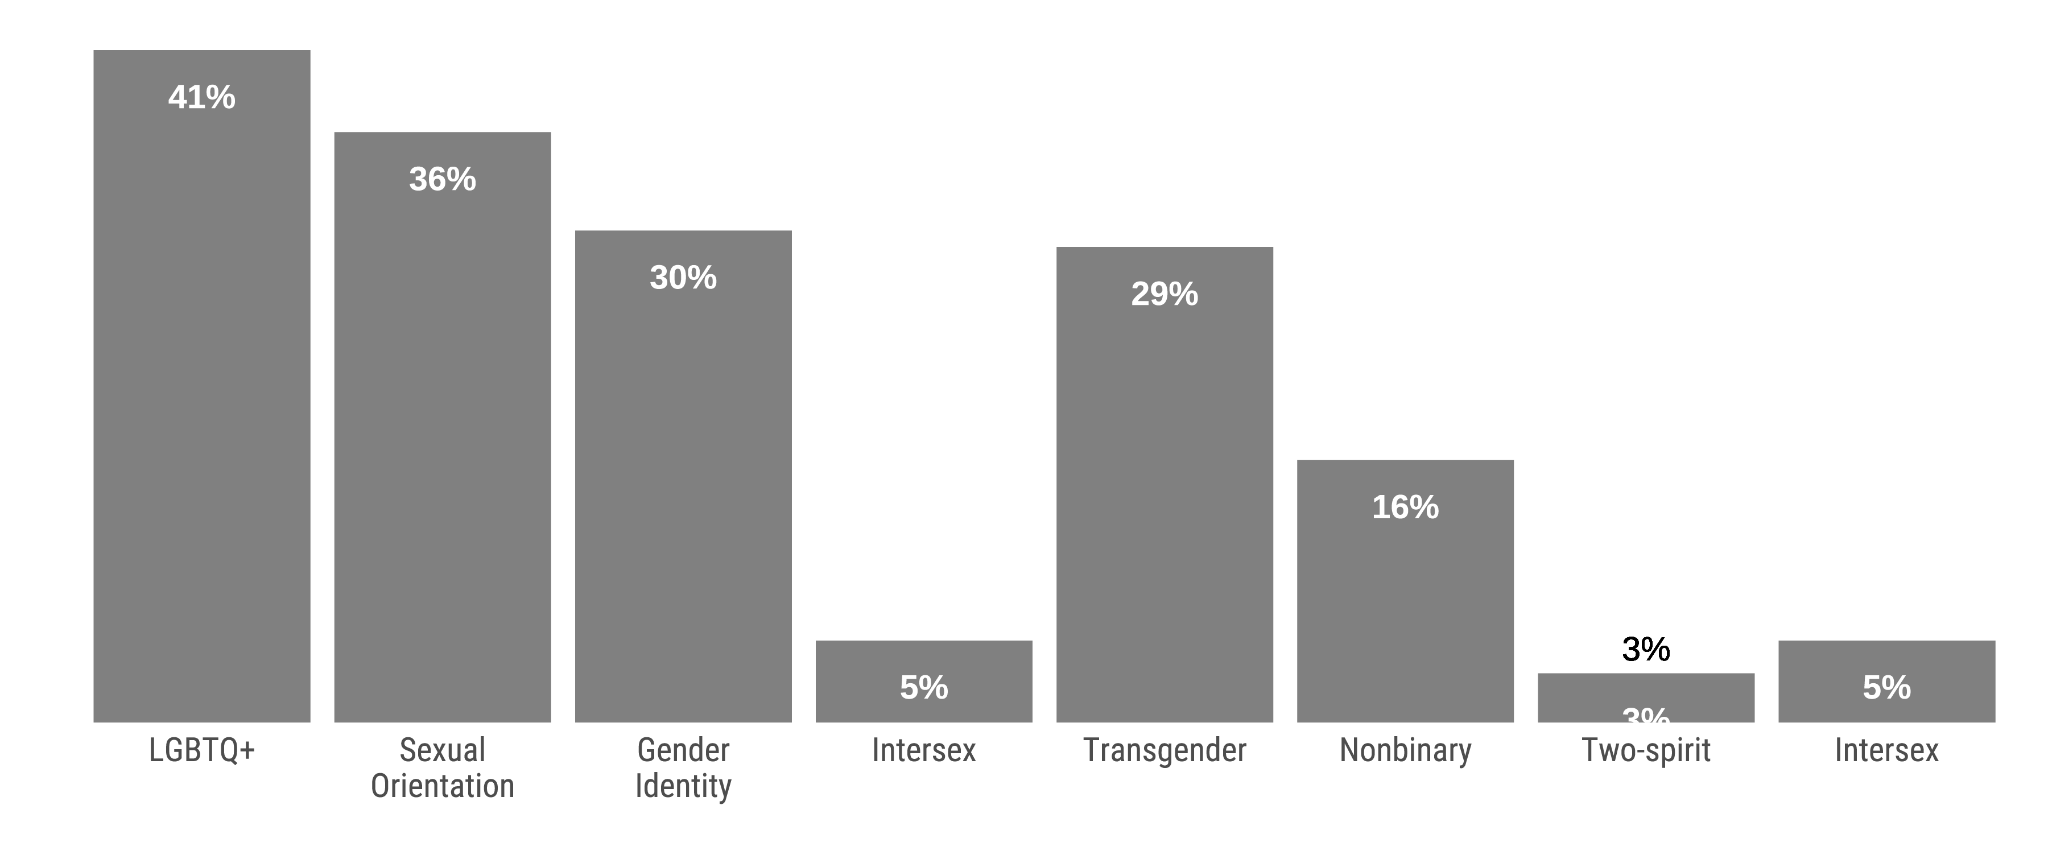 Sexual Orientation / Gender Identity are not often collected.